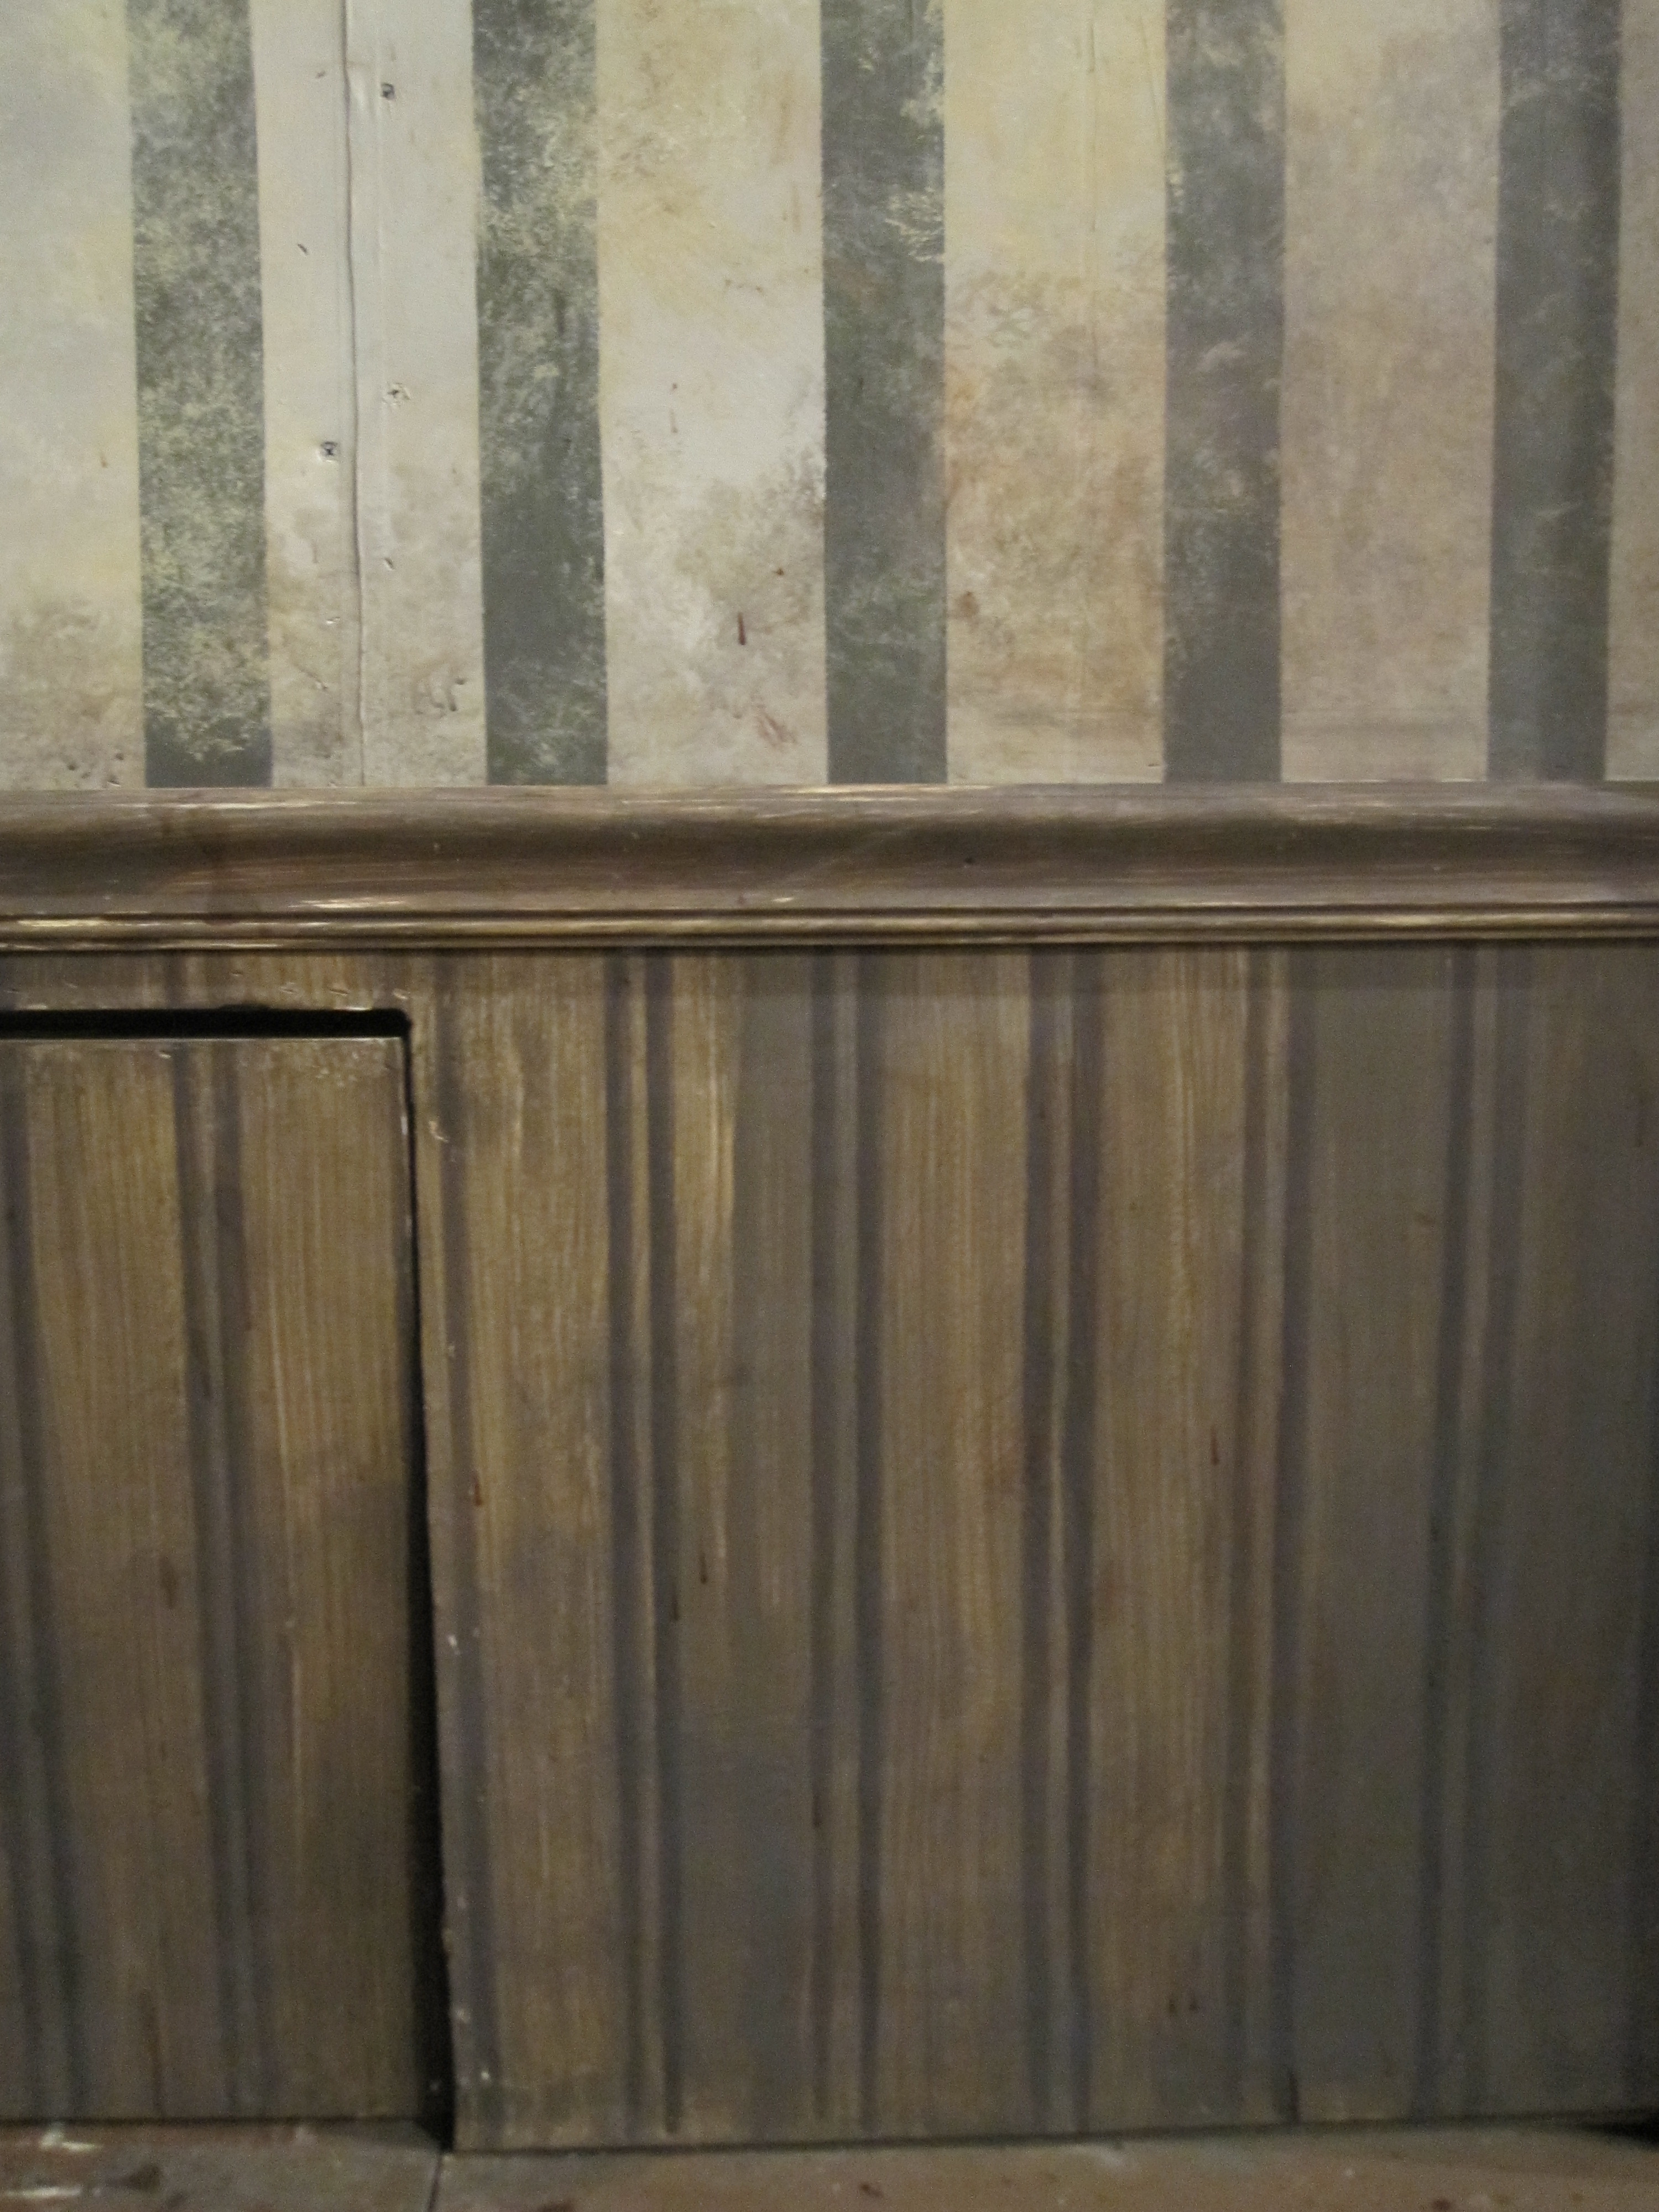 wainscoting wallpaper,wall,wood,furniture,wood stain,pattern